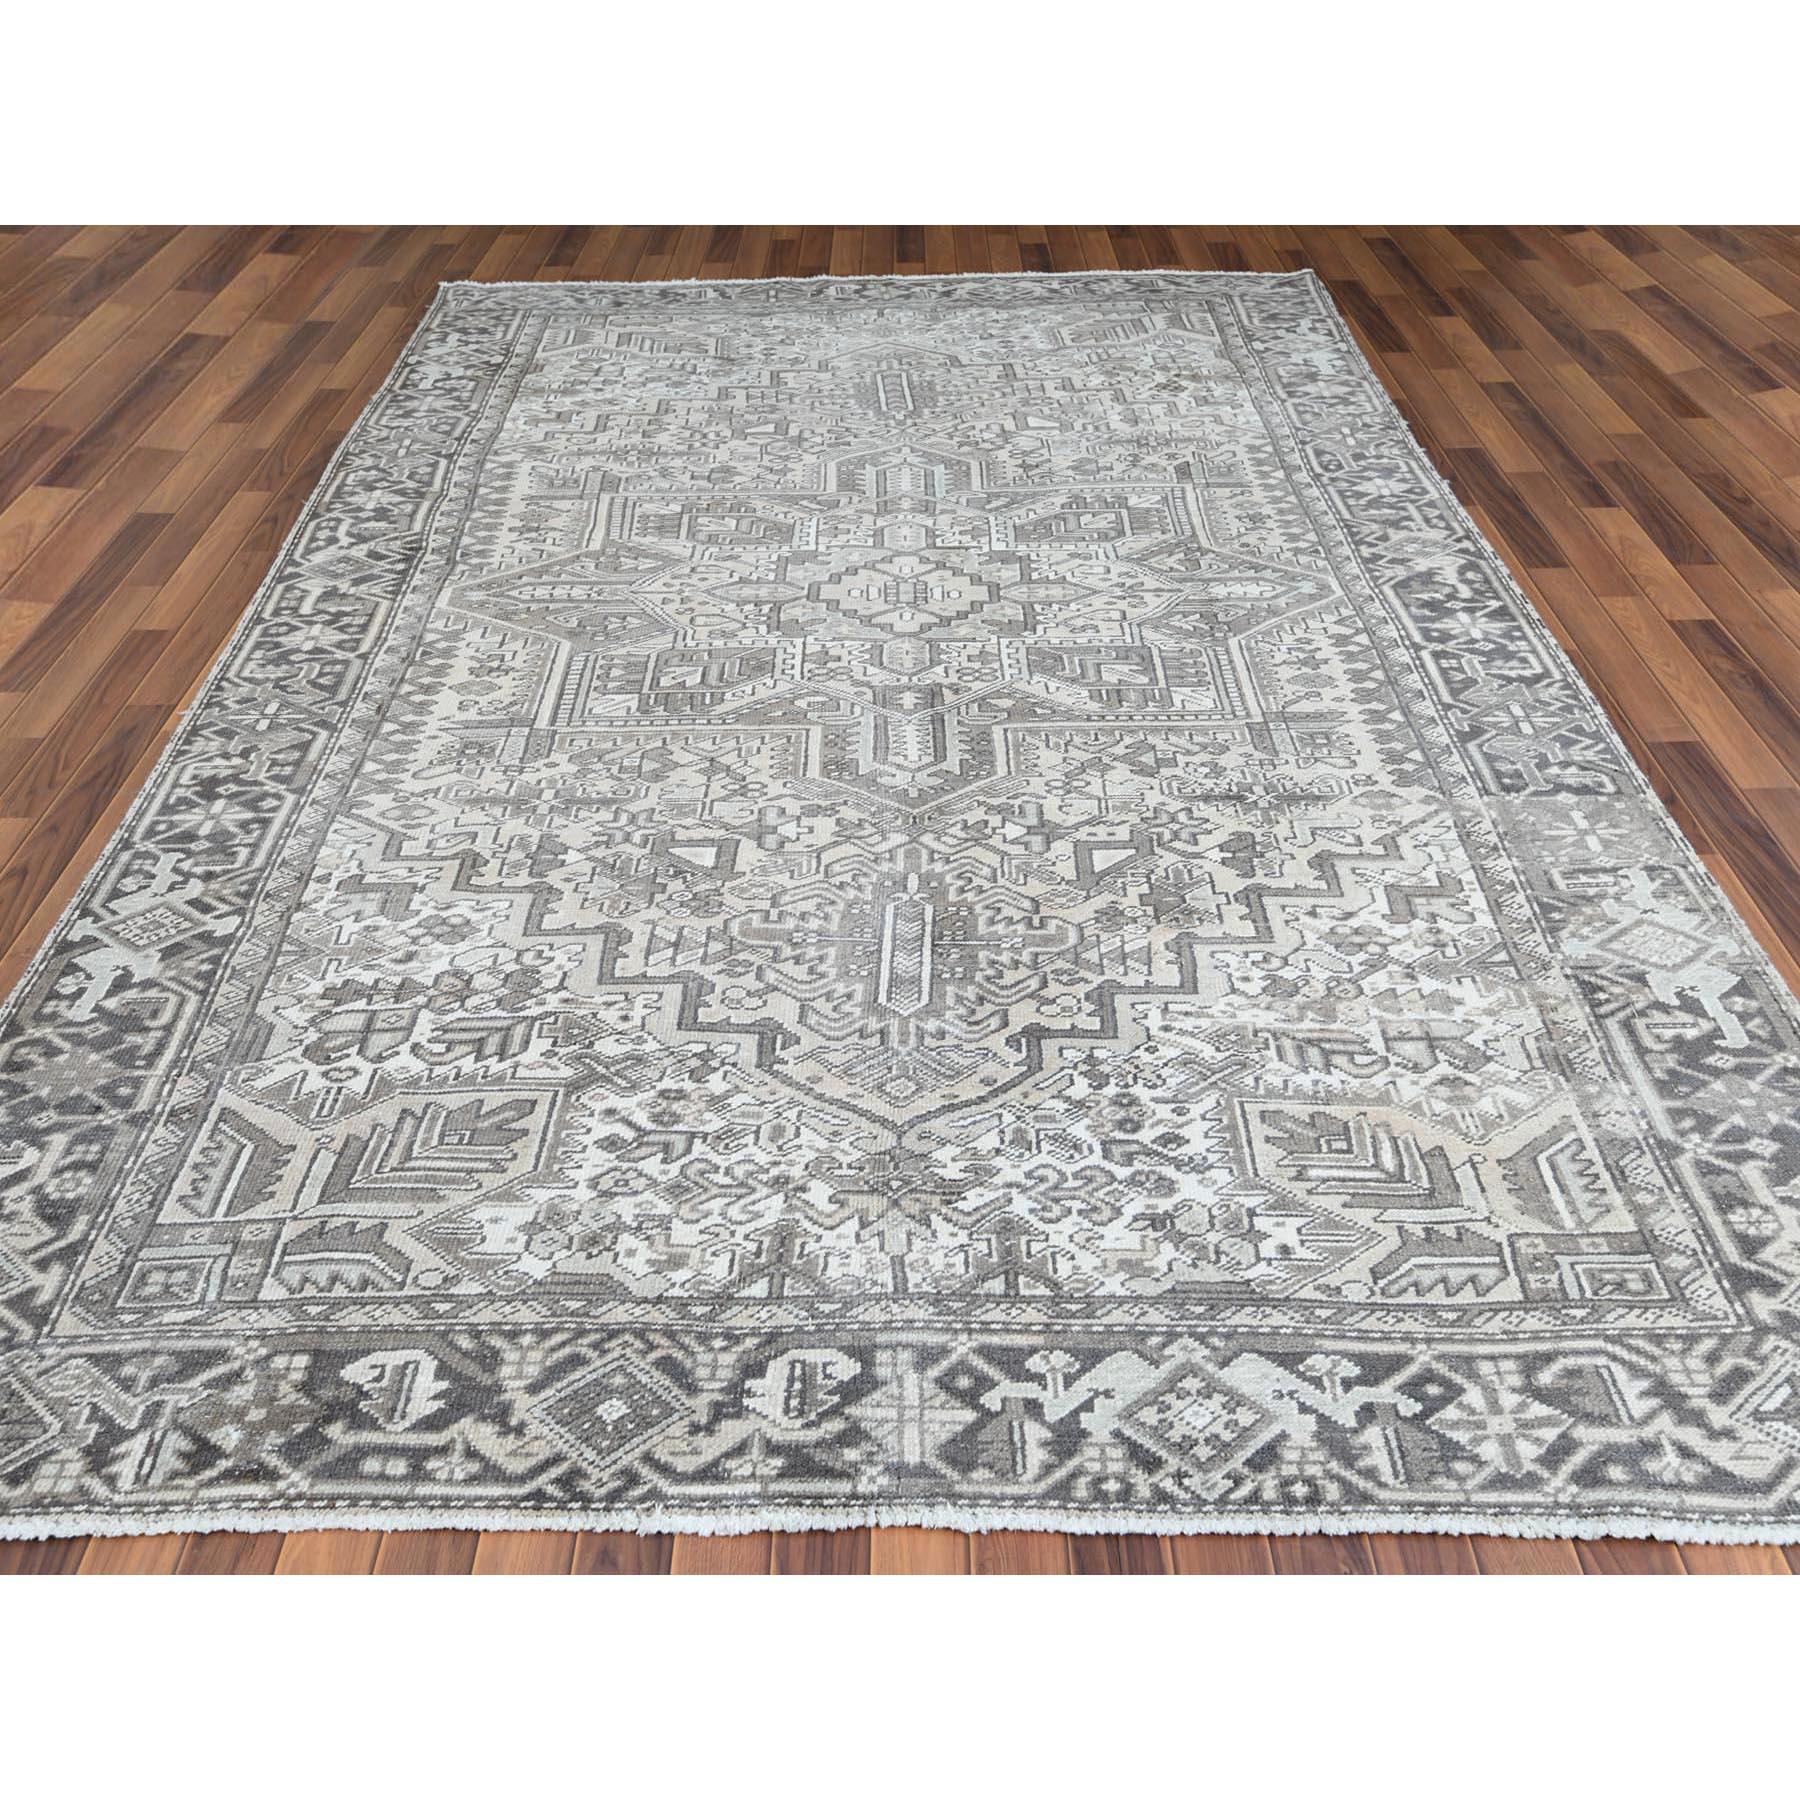 Medieval Semi Antique Washed Out Ivory Persian Heriz Oriental Rug